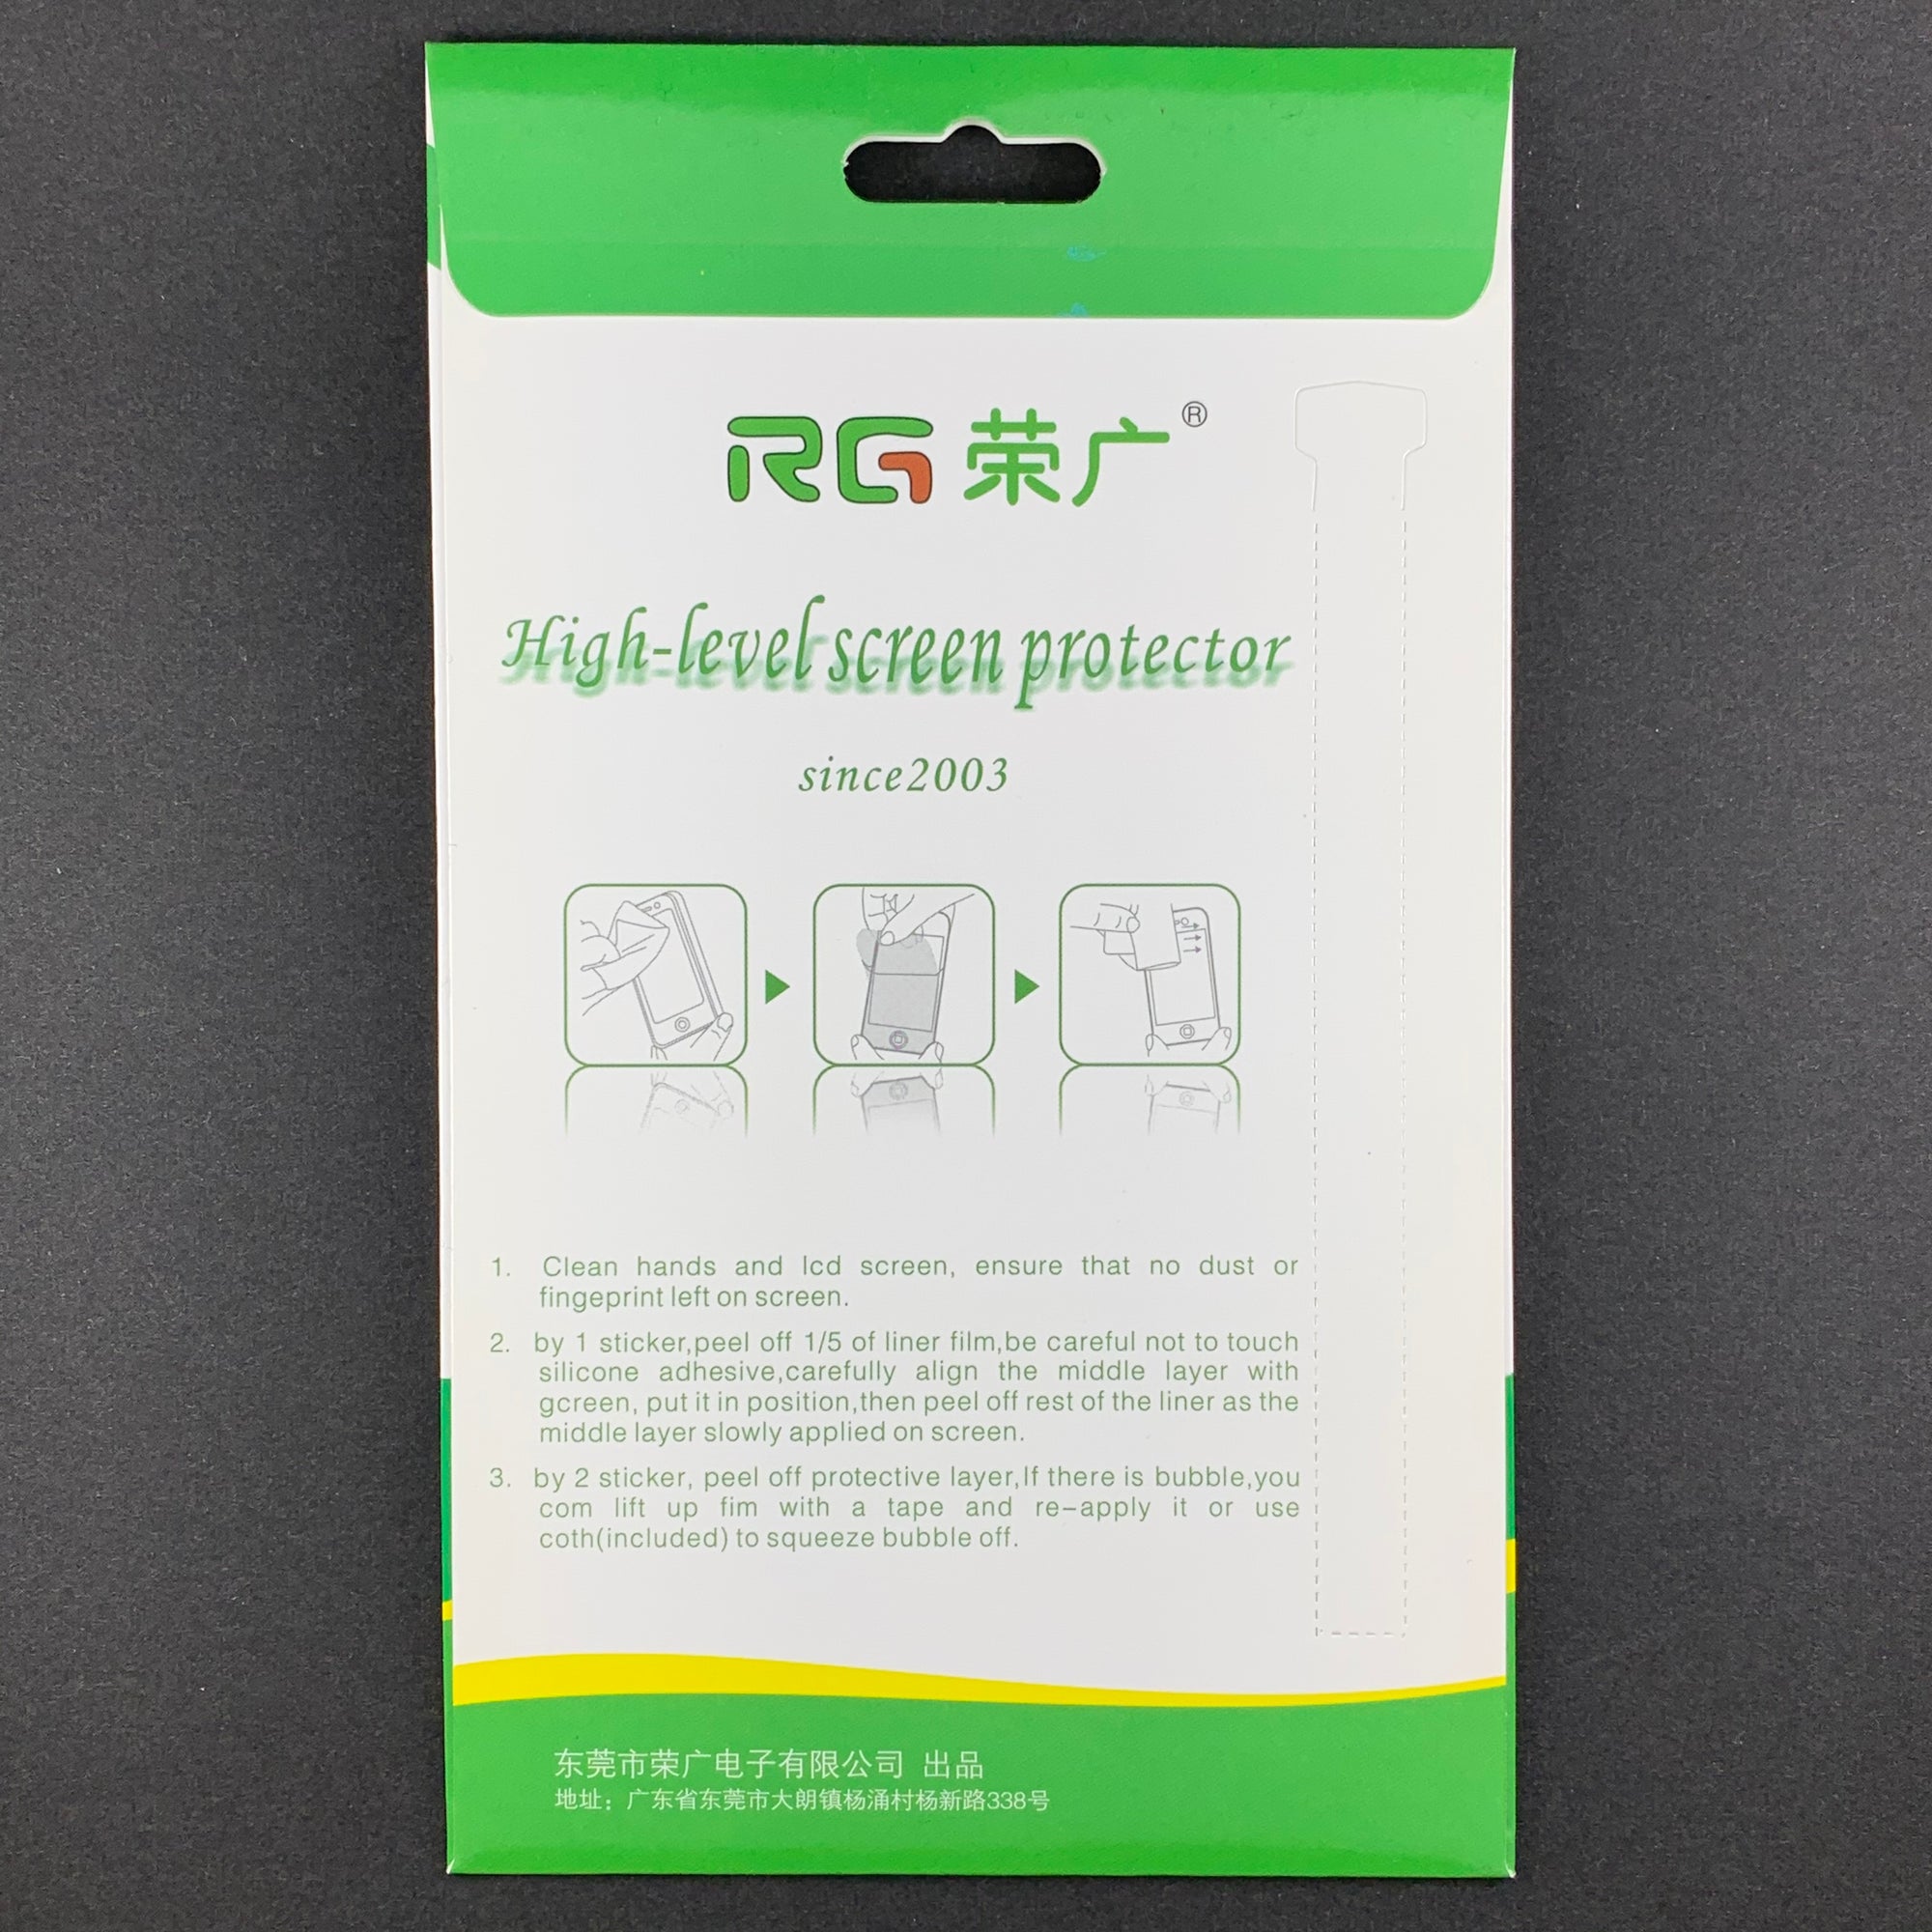 RG Professional Soft Film Screen Protector for iPad Pro 12.9" 3rd / 4th Gen (CLEAR, 2-PACK)